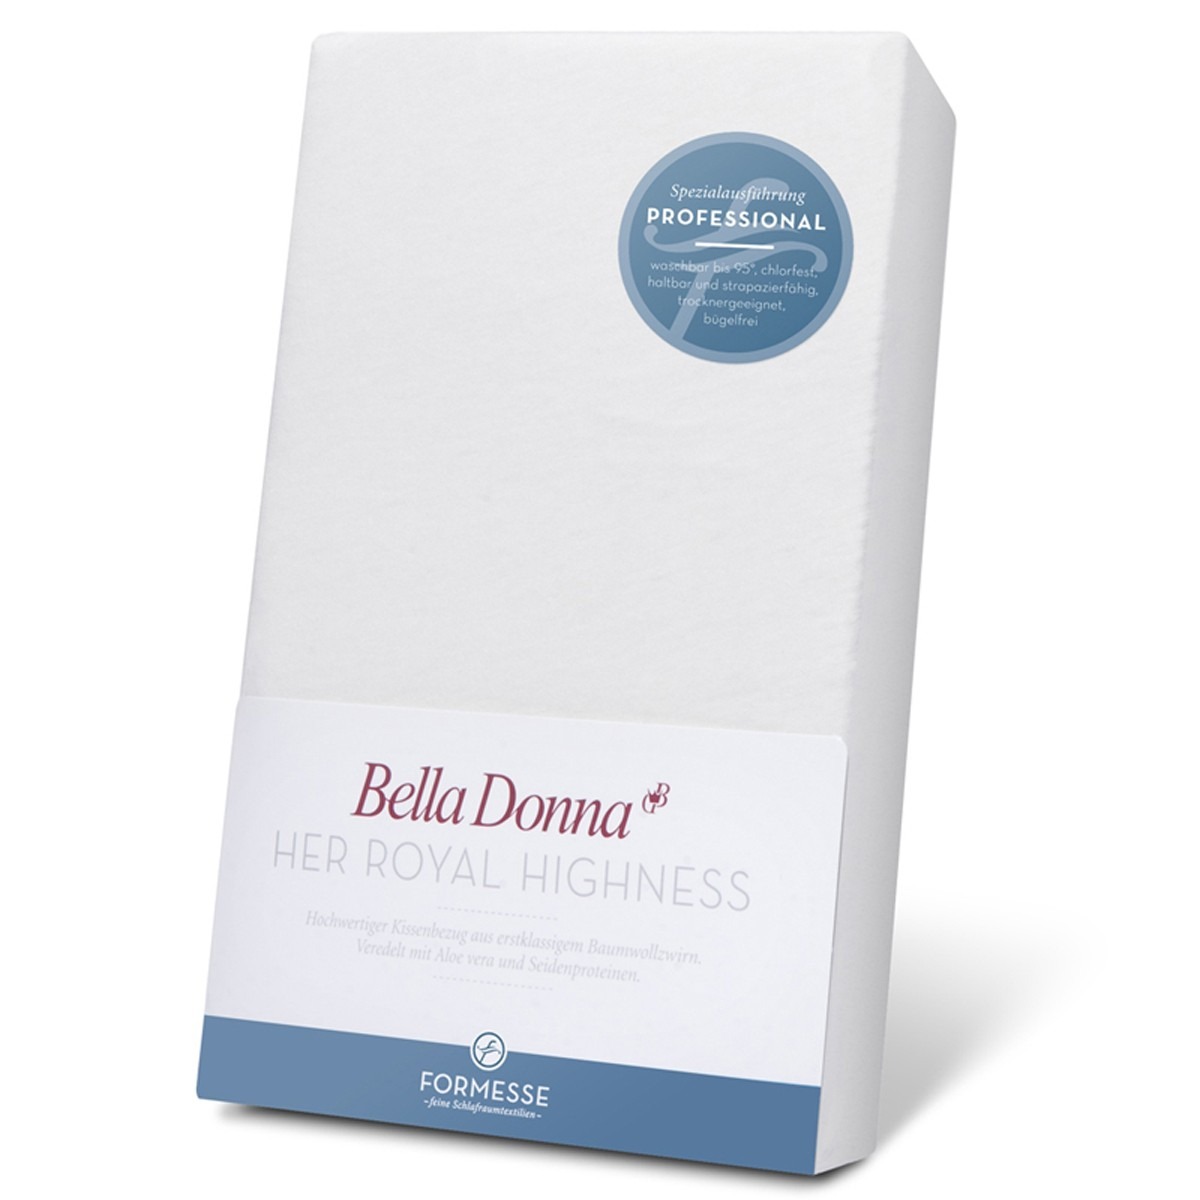 Package of Bella Donna Fitted Sheets | Featured image for the Premium Fitted Sheets product page from Wenatex.